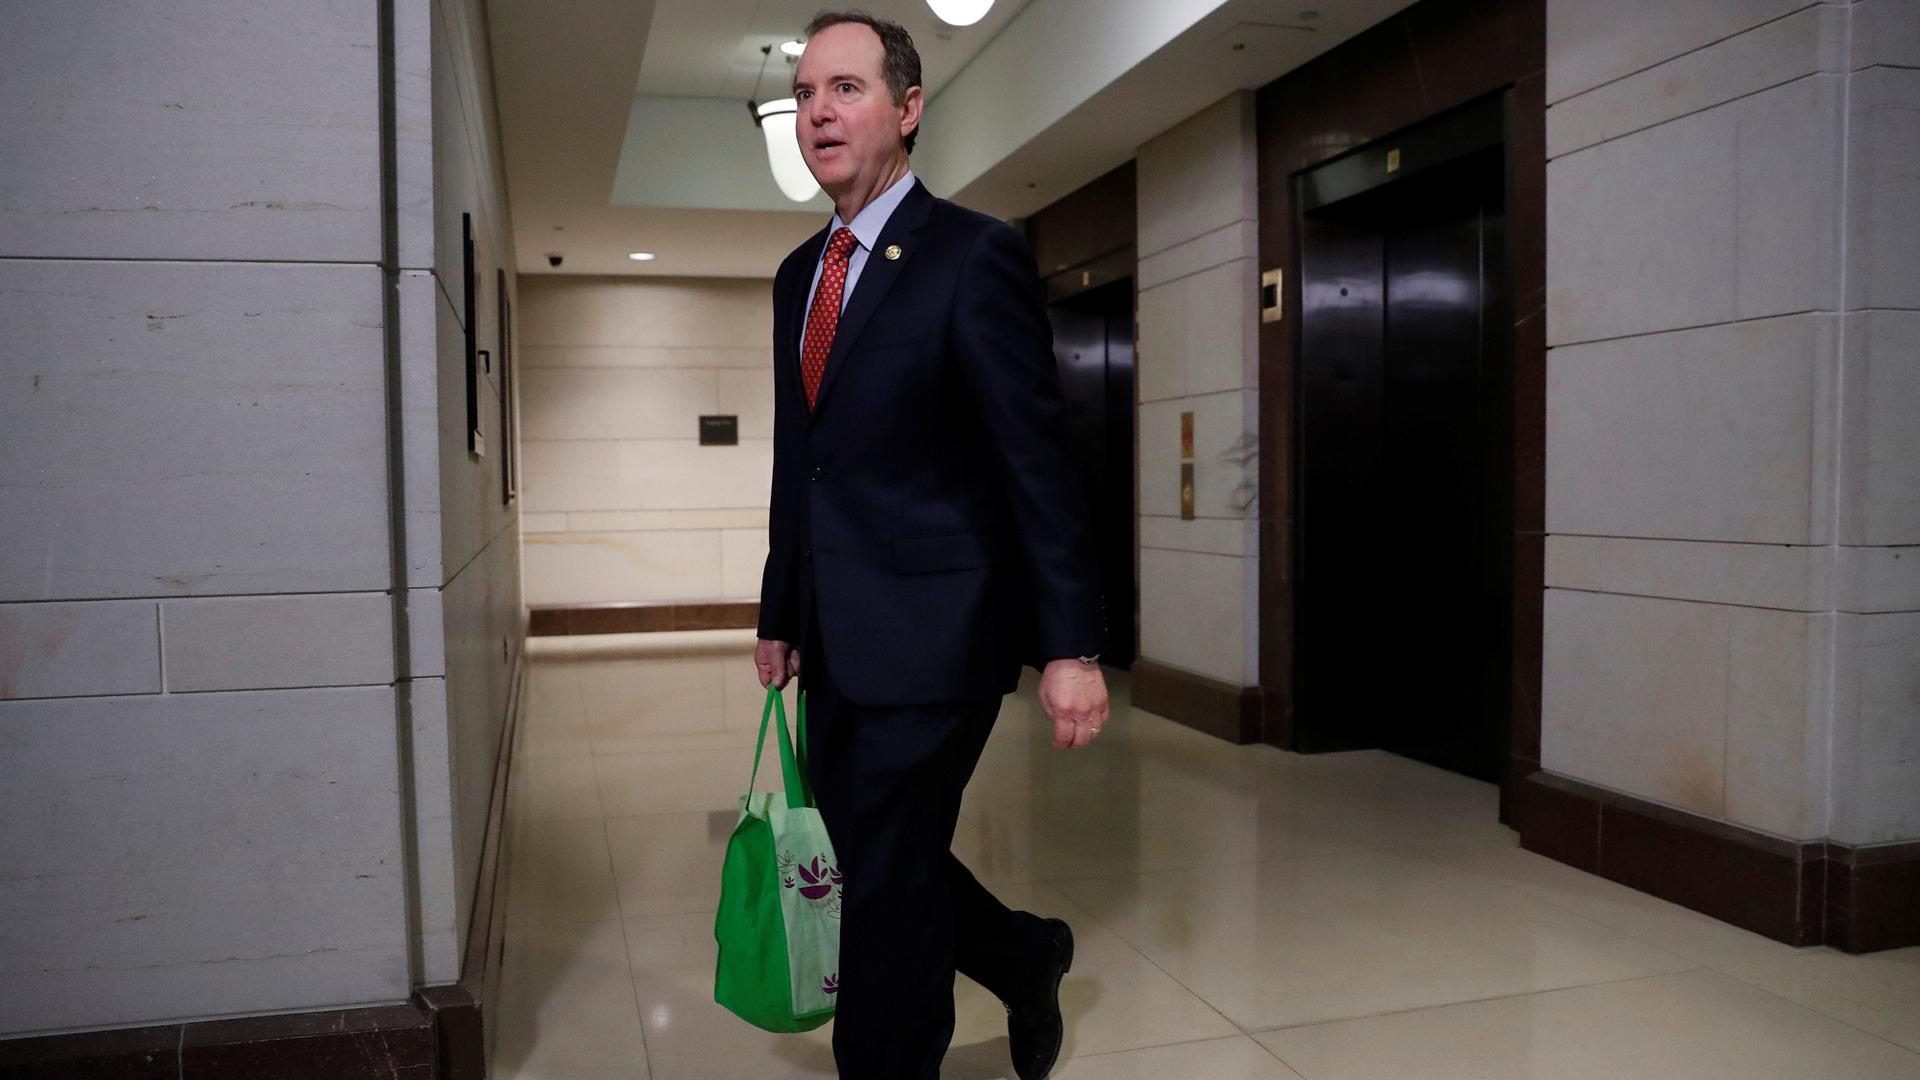 Rep. Adam Schiff, carrying a green bag, arrives for closed meeting of the House Intelligence Committee in Washington.